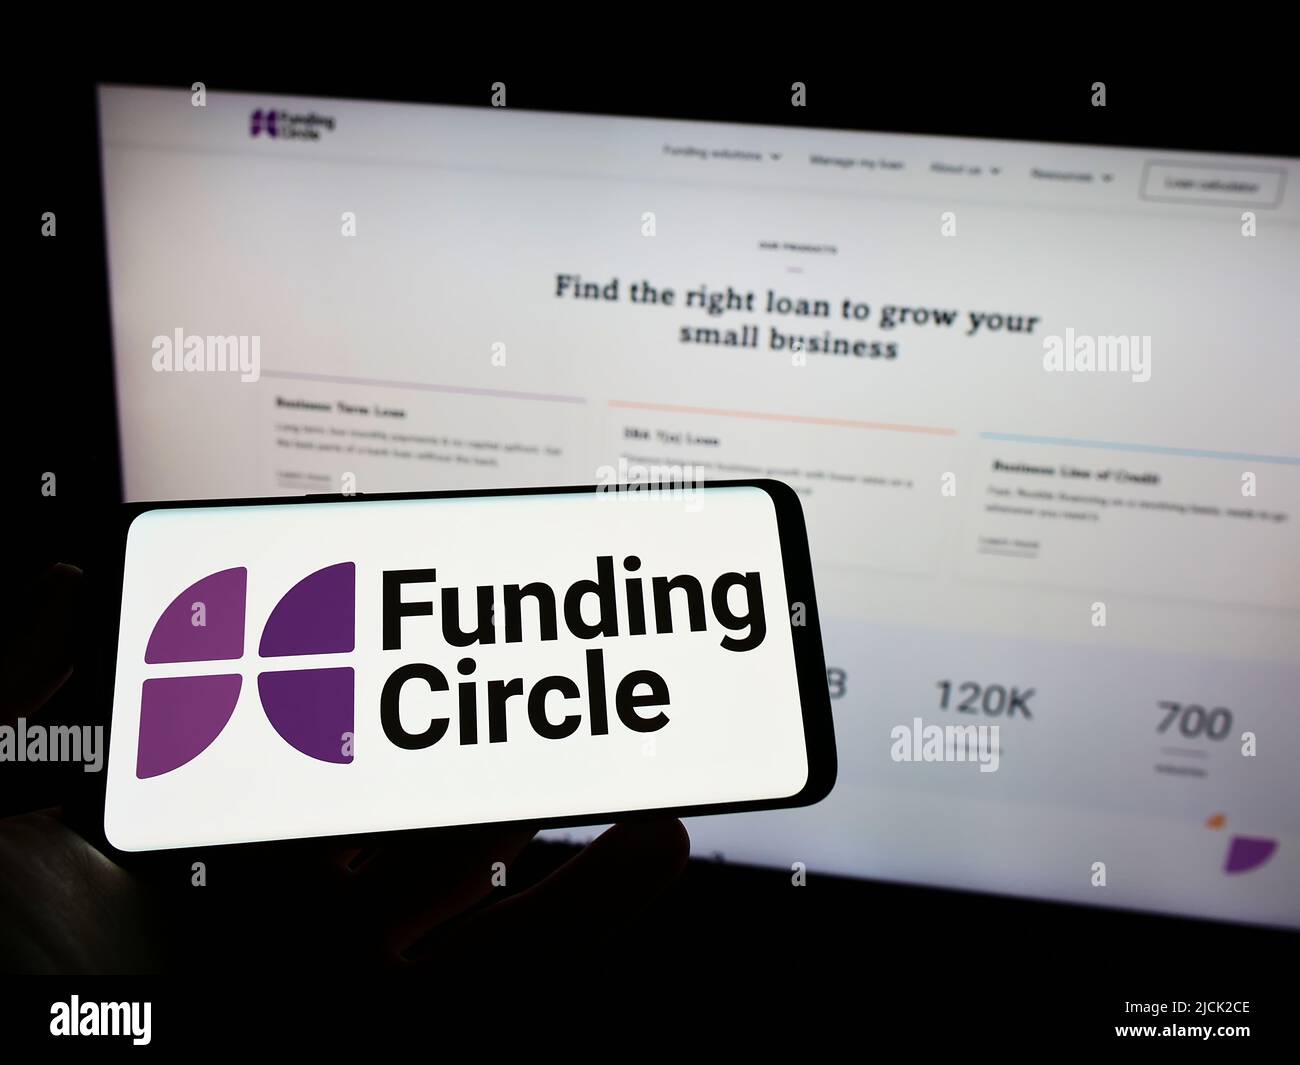 Person holding cellphone with logo of British lending company Funding Circle Ltd. on screen in front of business webpage. Focus on phone display. Stock Photo